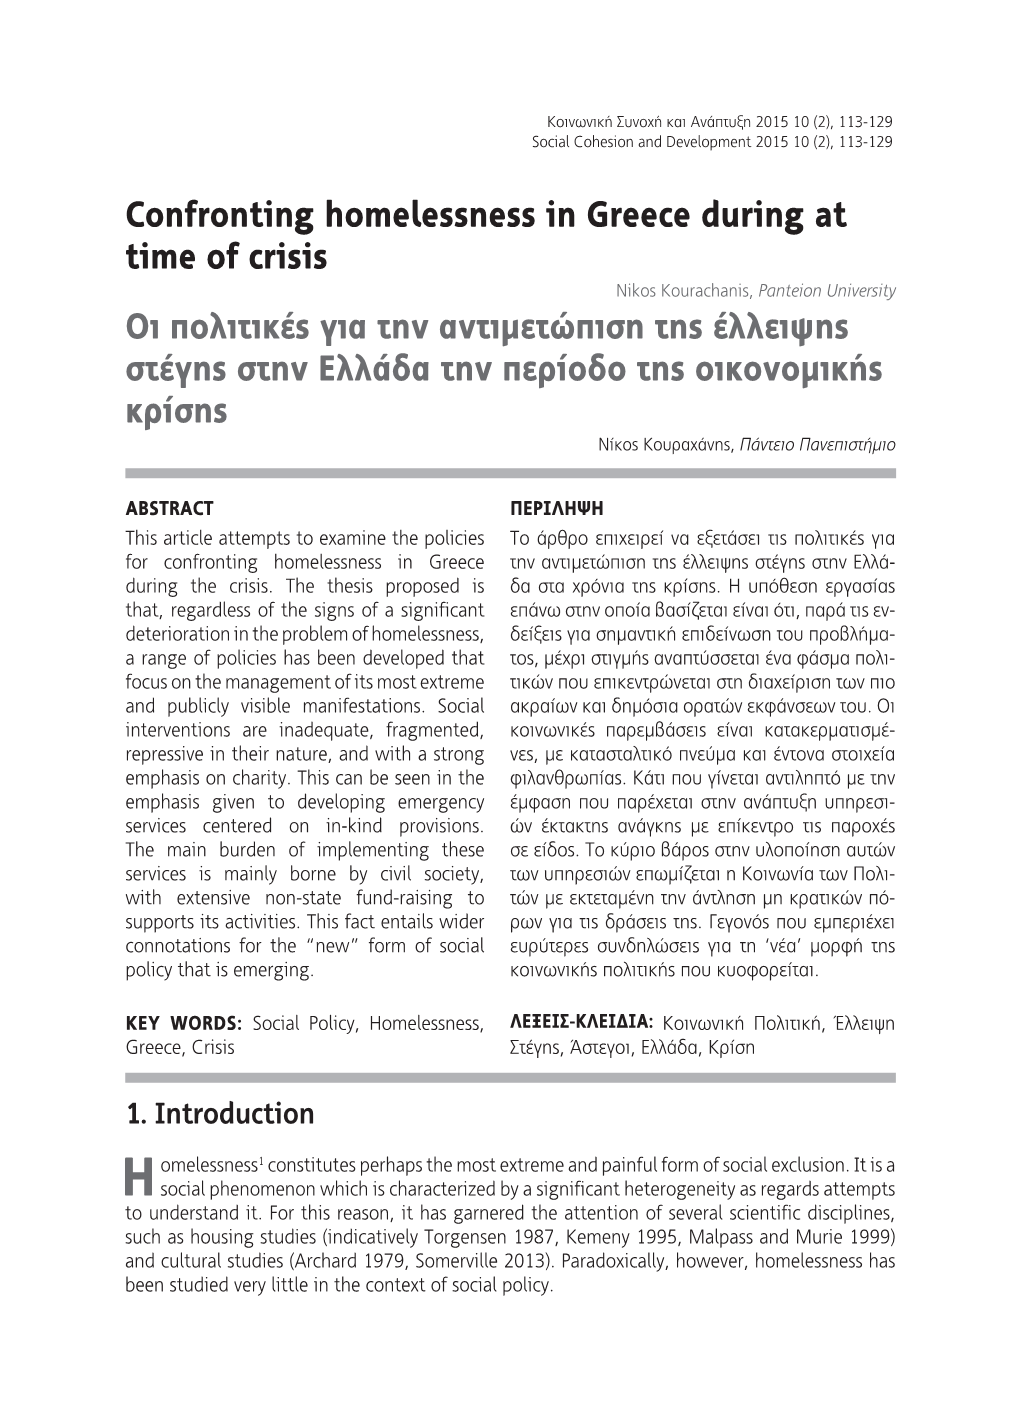 Confronting Homelessness in Greece During at Time of Crisis Οι Πολιτικές Για Την Αντιμετώπιση Τη